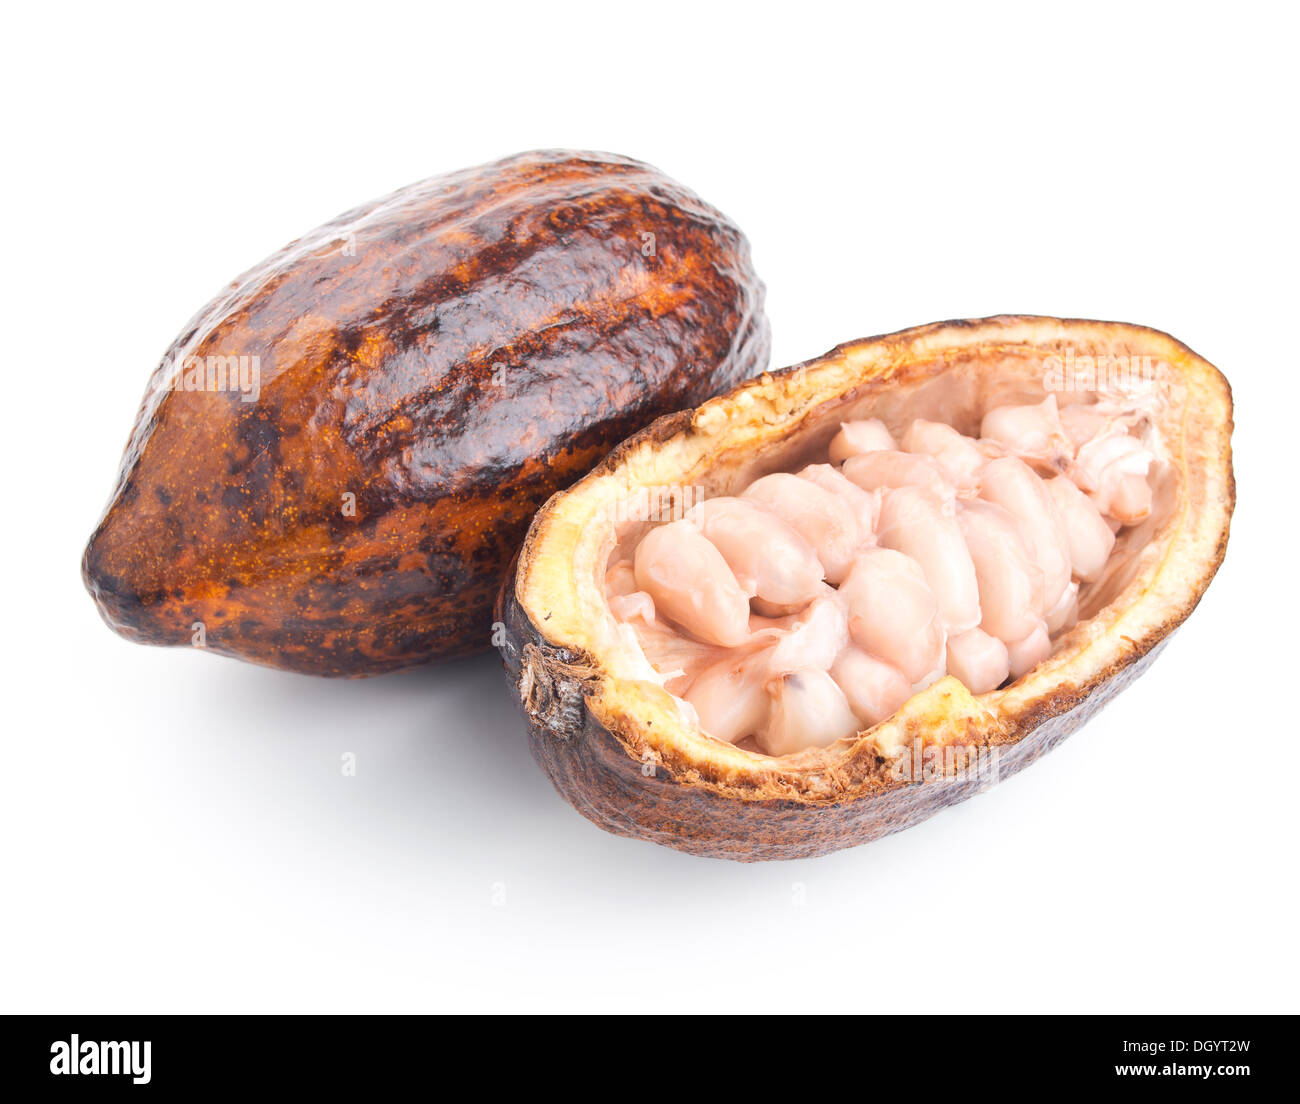 7 and a Half Very Simple Things You Can Do To Save cocoa beans